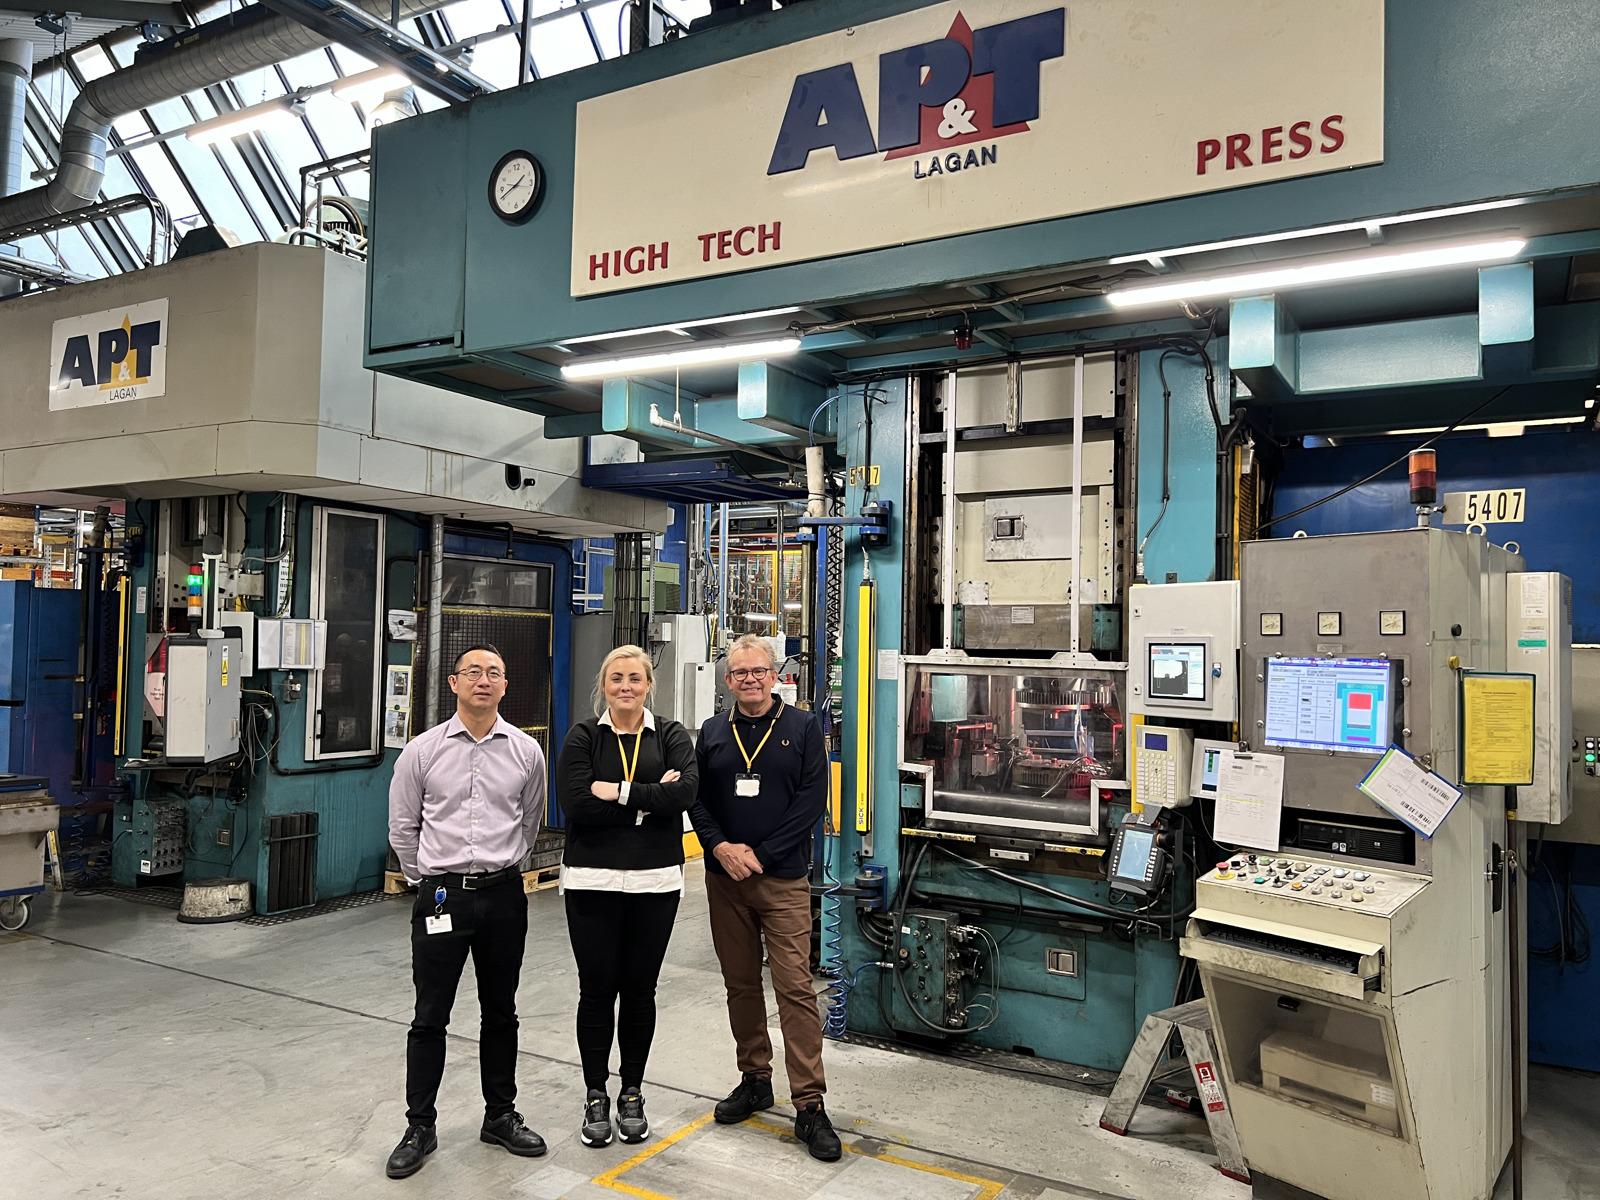 High-tech, then and now. Grundfos in Bjerringbro, Denmark has ordered a new energy-efficient servo hydraulic press from AP&T for installation in 2025. Here, Peter Lund Pedersen, project manager at Grundfos with Sandra Johansson, project manager at AP&T and Peter Karlsson, Key Account and Area Sales Manager, also at AP&T, standing in front of one of the older AP&T presses in the facility.  